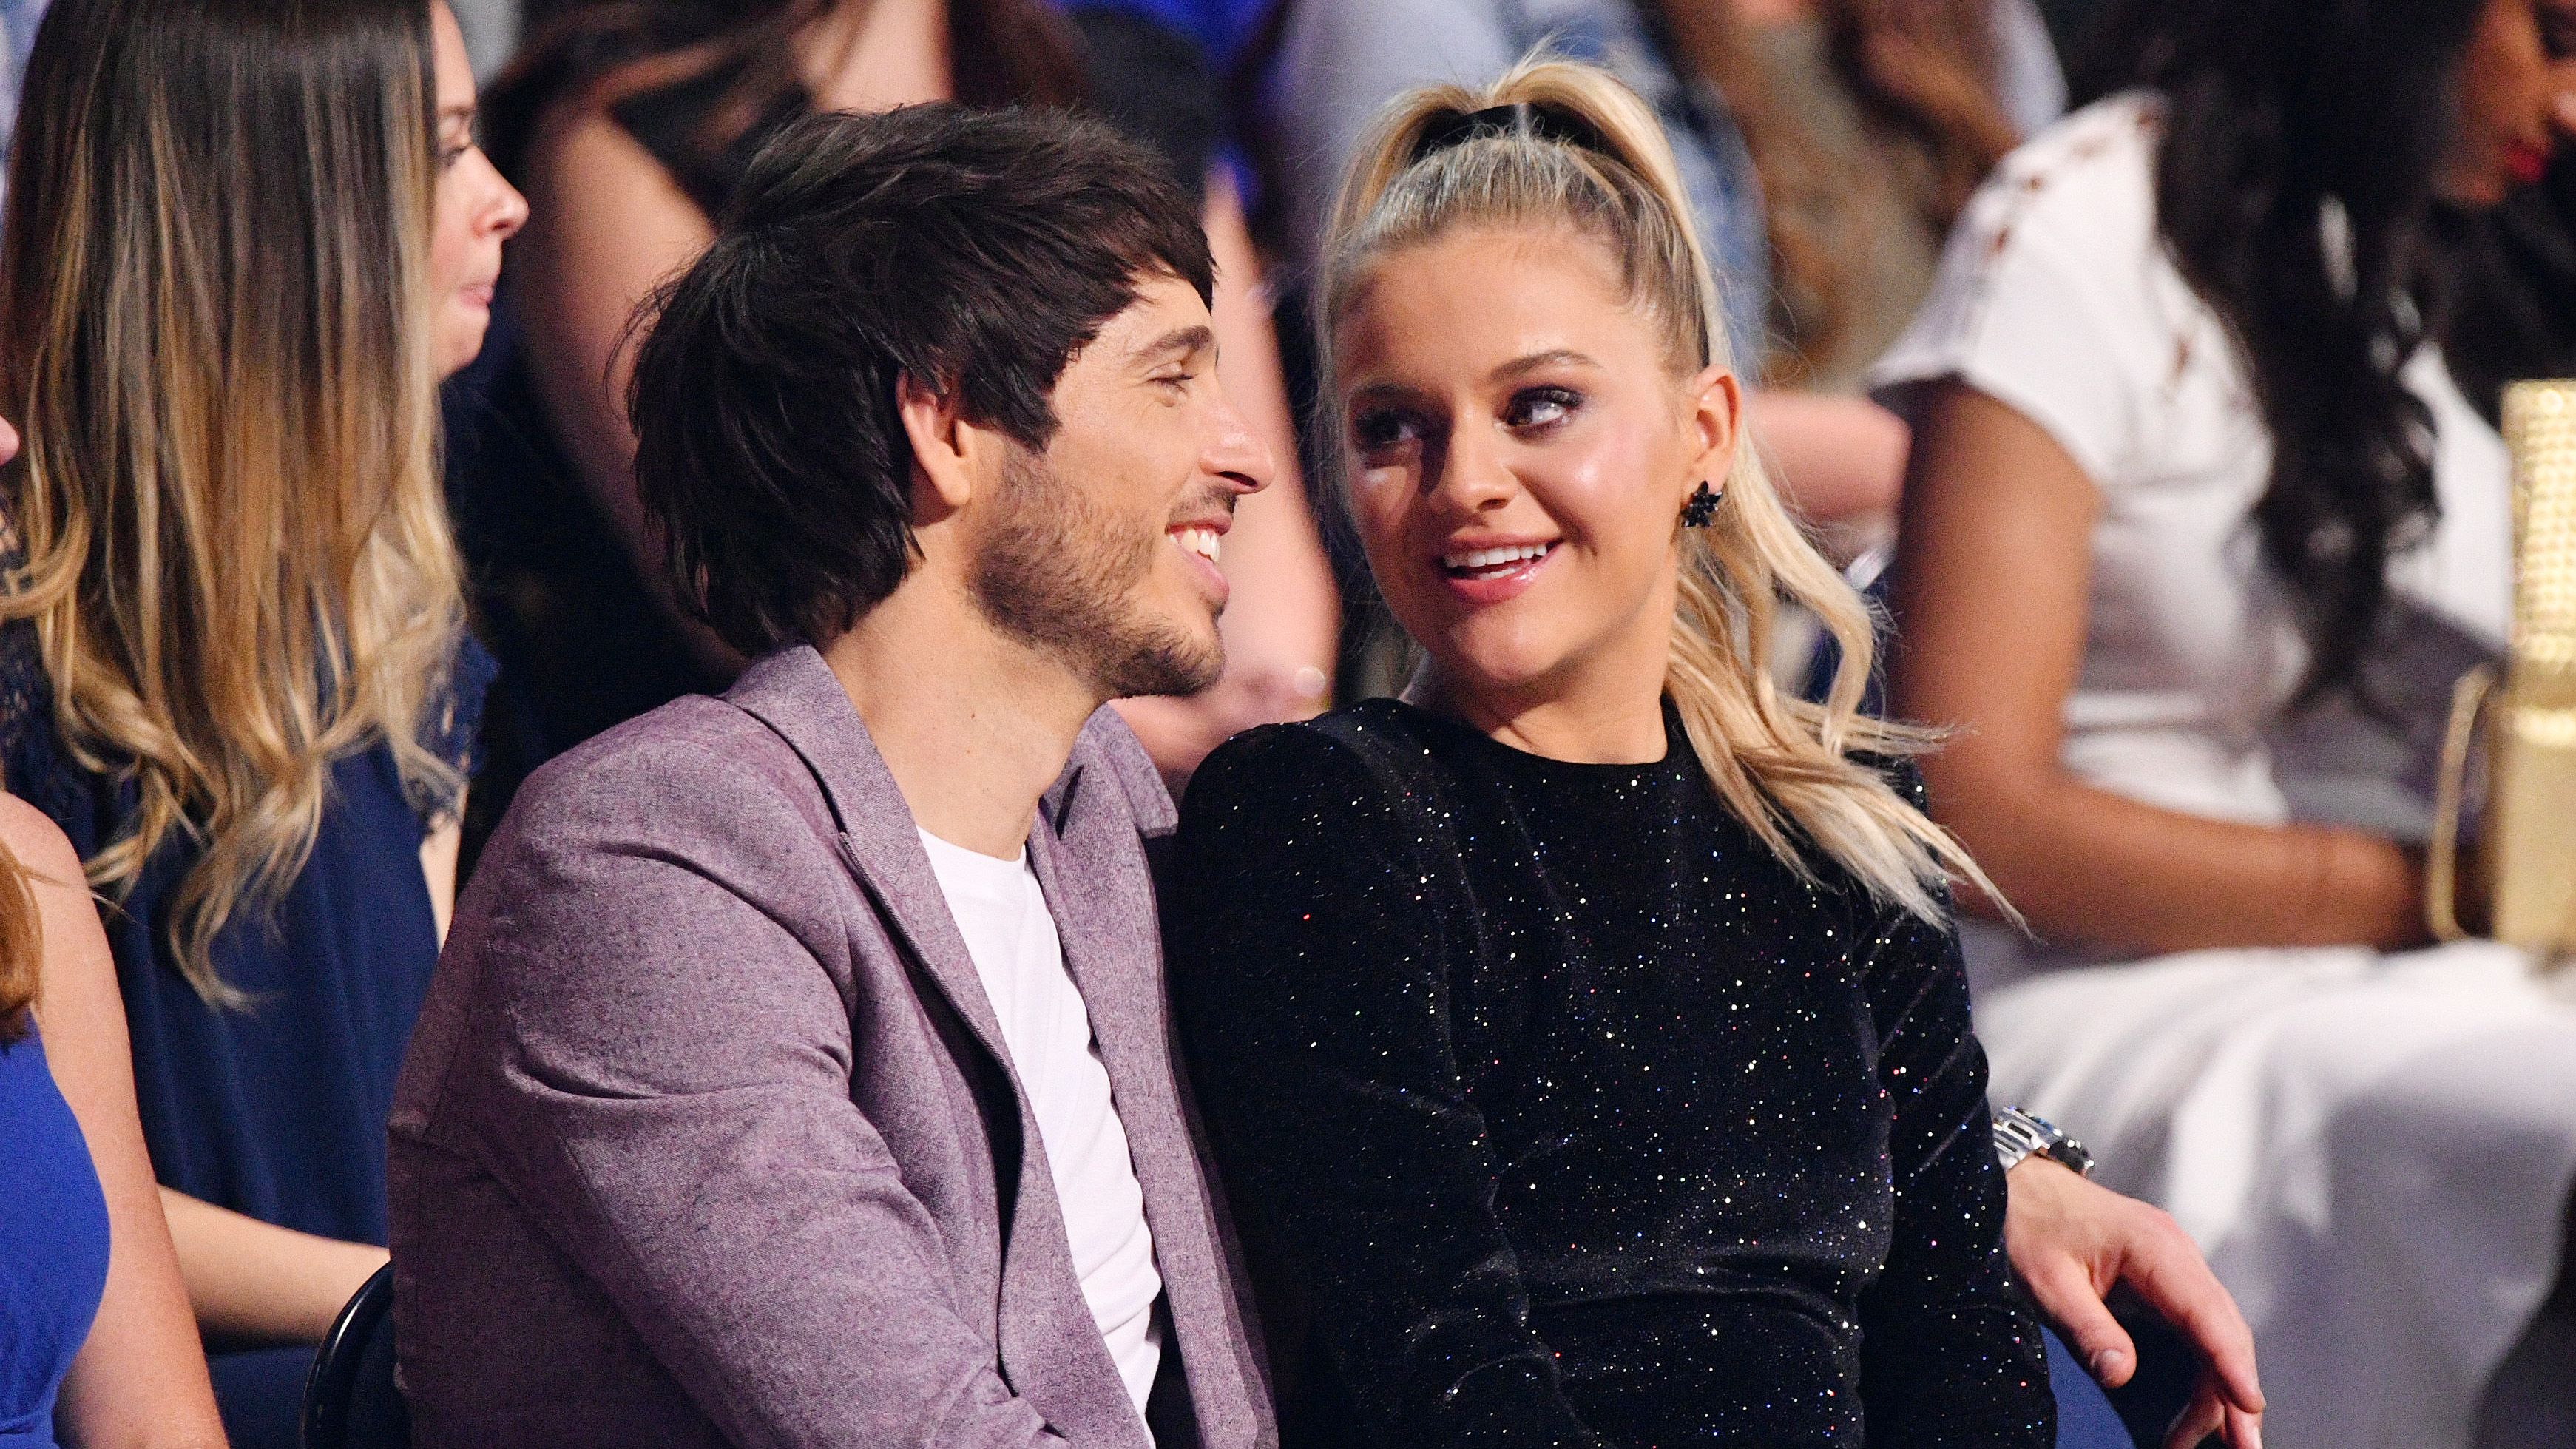 Why Kelsea Ballerini and Morgan Evans Are Getting Divorced